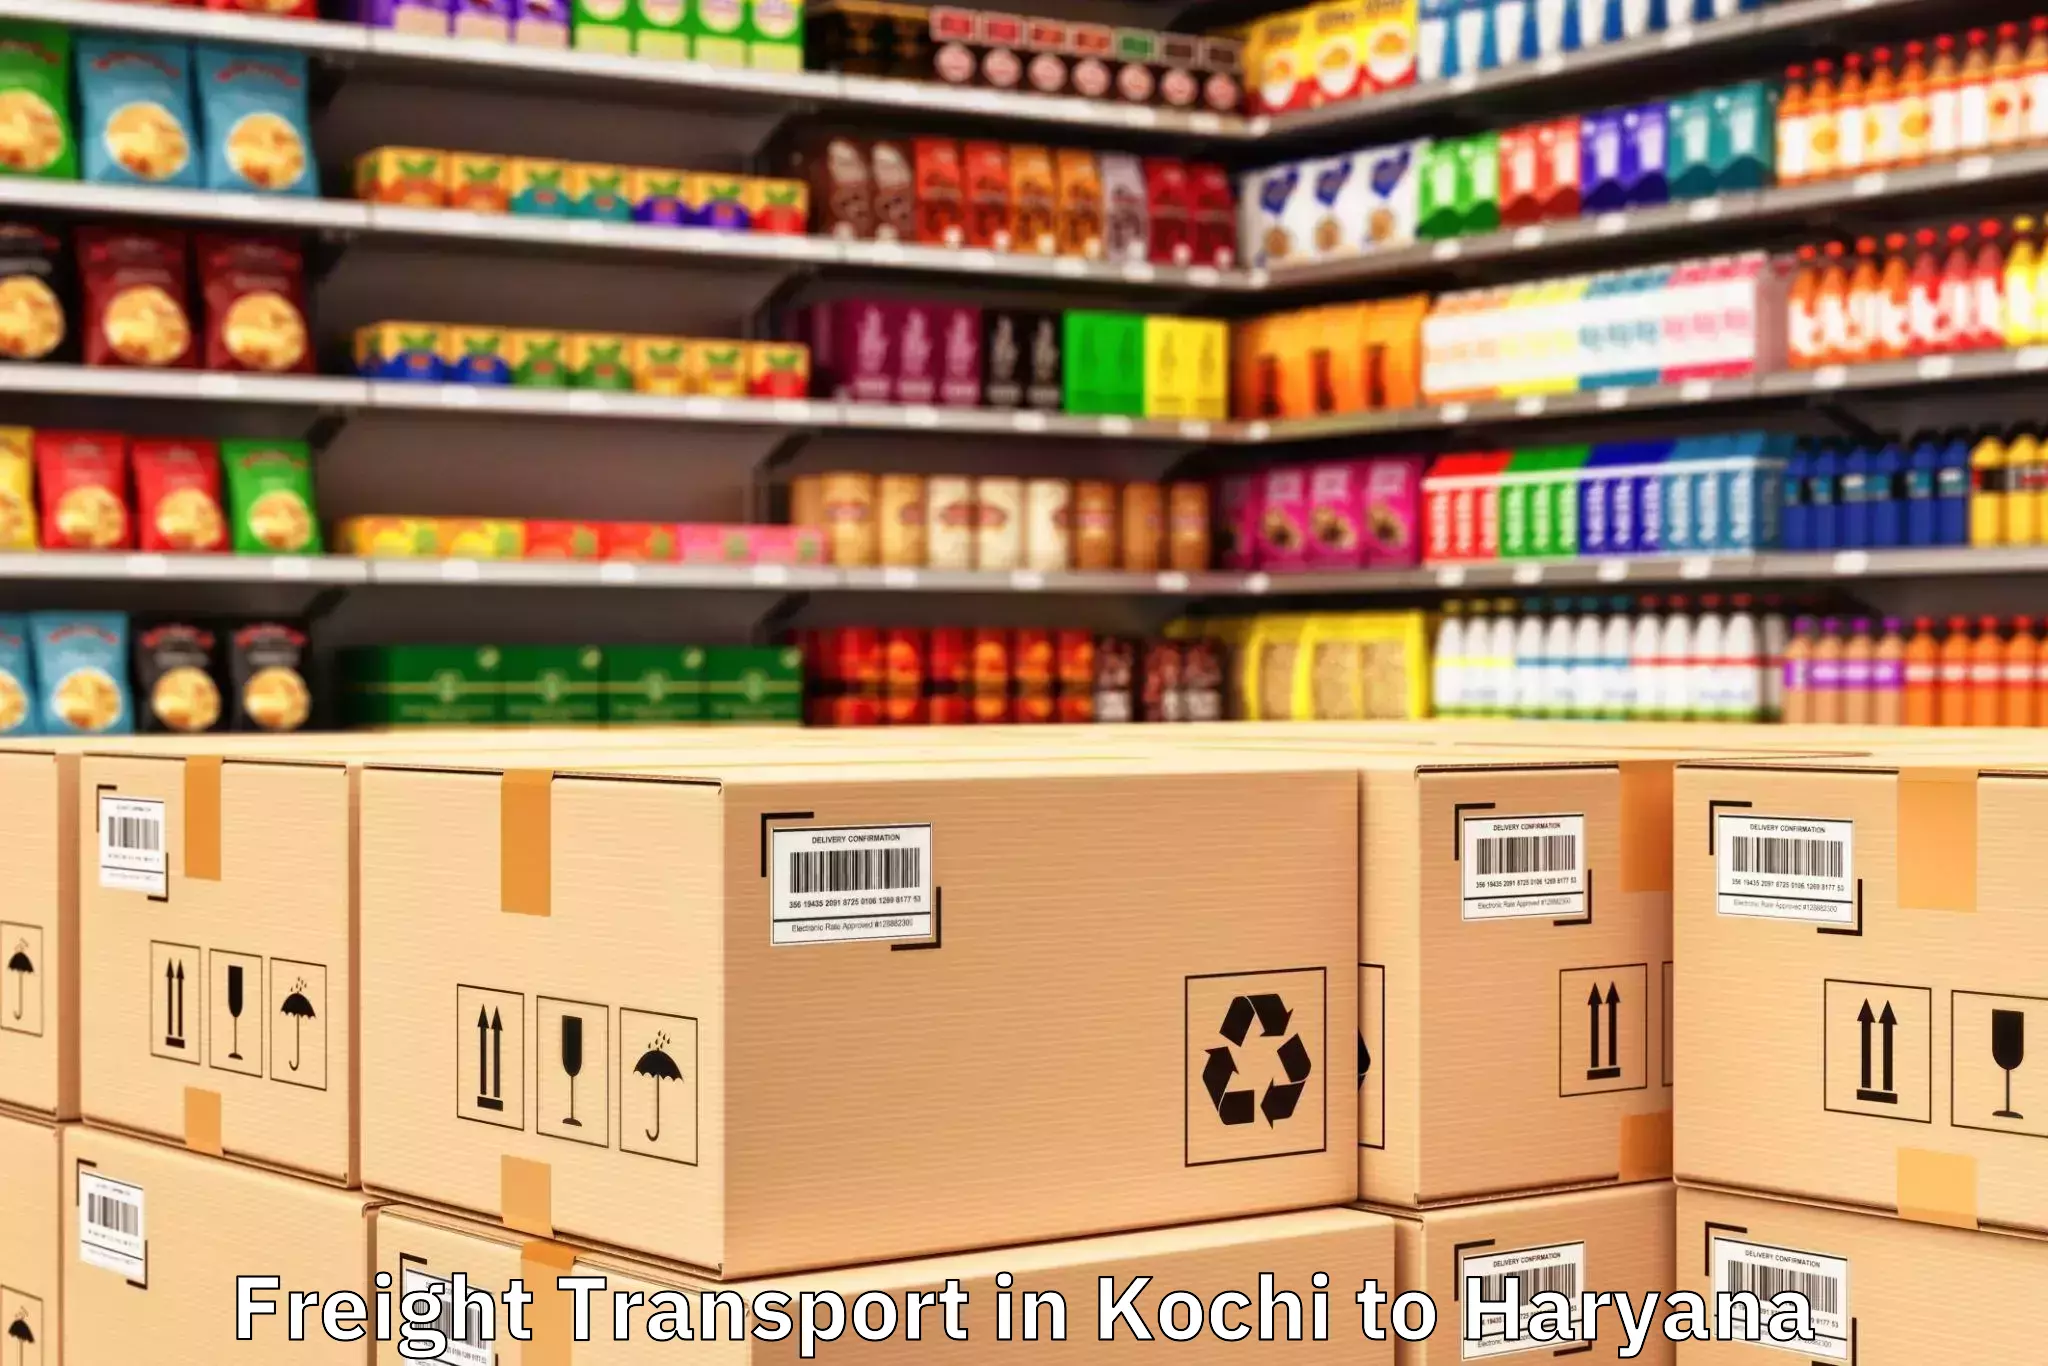 Top Kochi to Ansal Plaza Mall Gurgaon Freight Transport Available